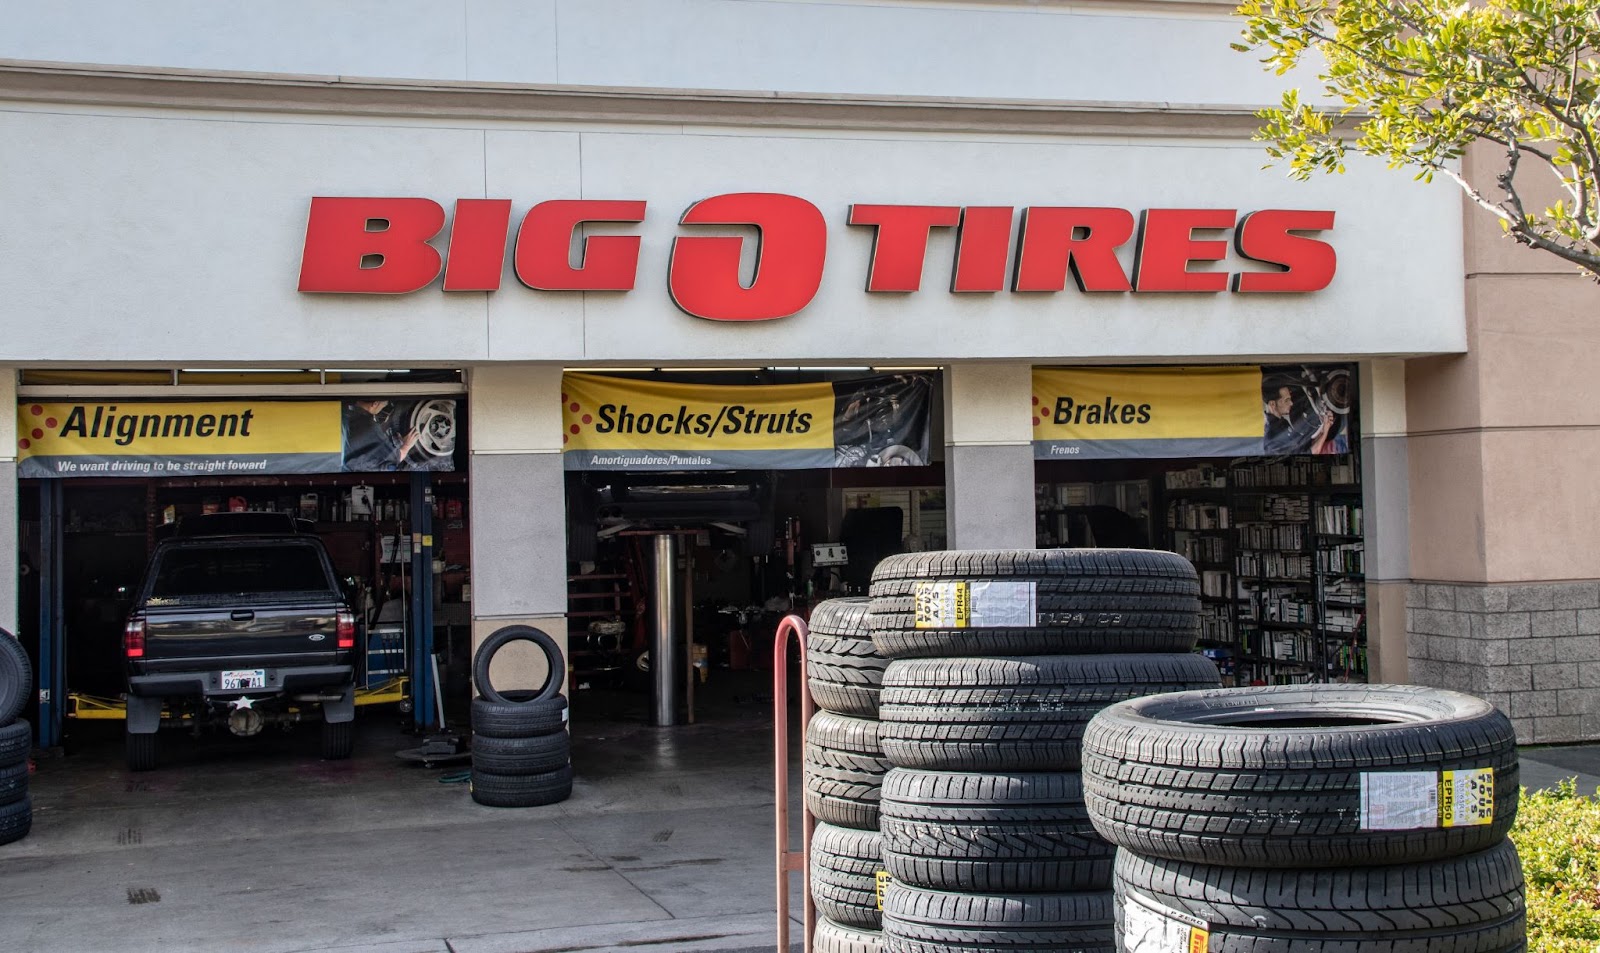 A picture of a Big-O-Tires store with tires outside and people working inside the shop.